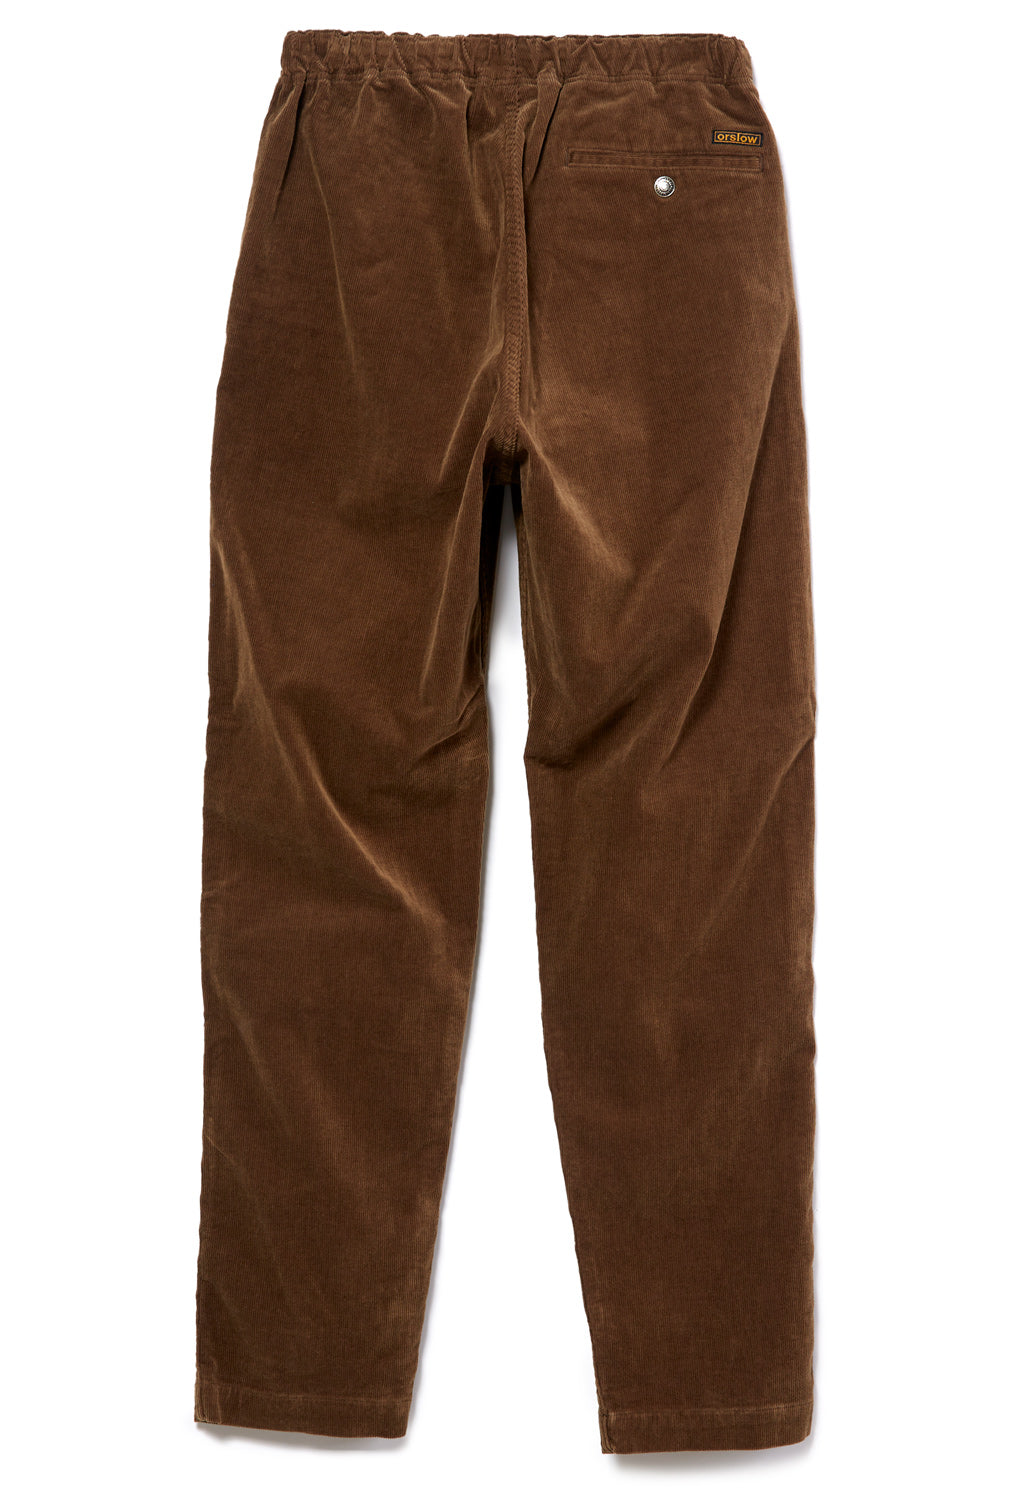 orSlow New Yorker Stretch Corduroy Pants - Brown